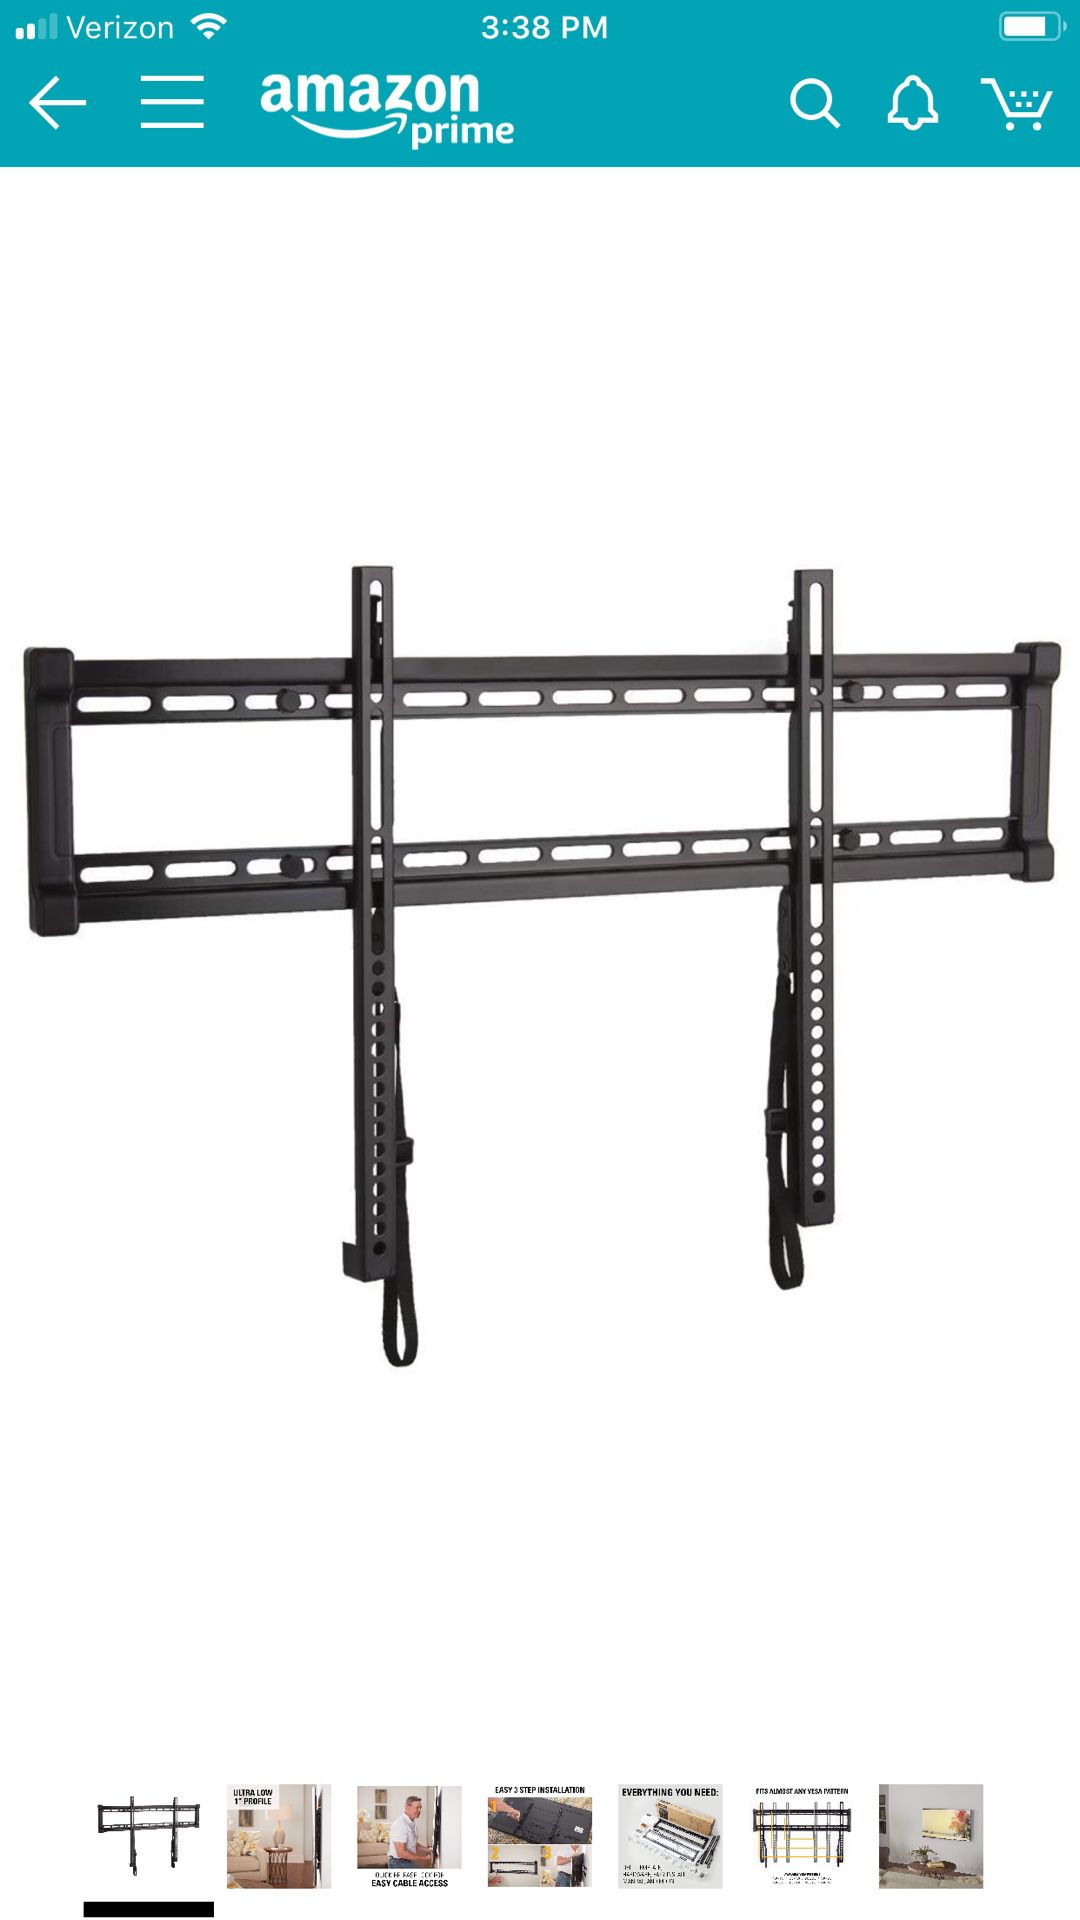 Sanus Super Low Profile Fixed Position TV Wall Mount Bracket for 40" - 80" TVs - Features Slim 1” Profile, Easy Access To Cables, Simple Install - OL